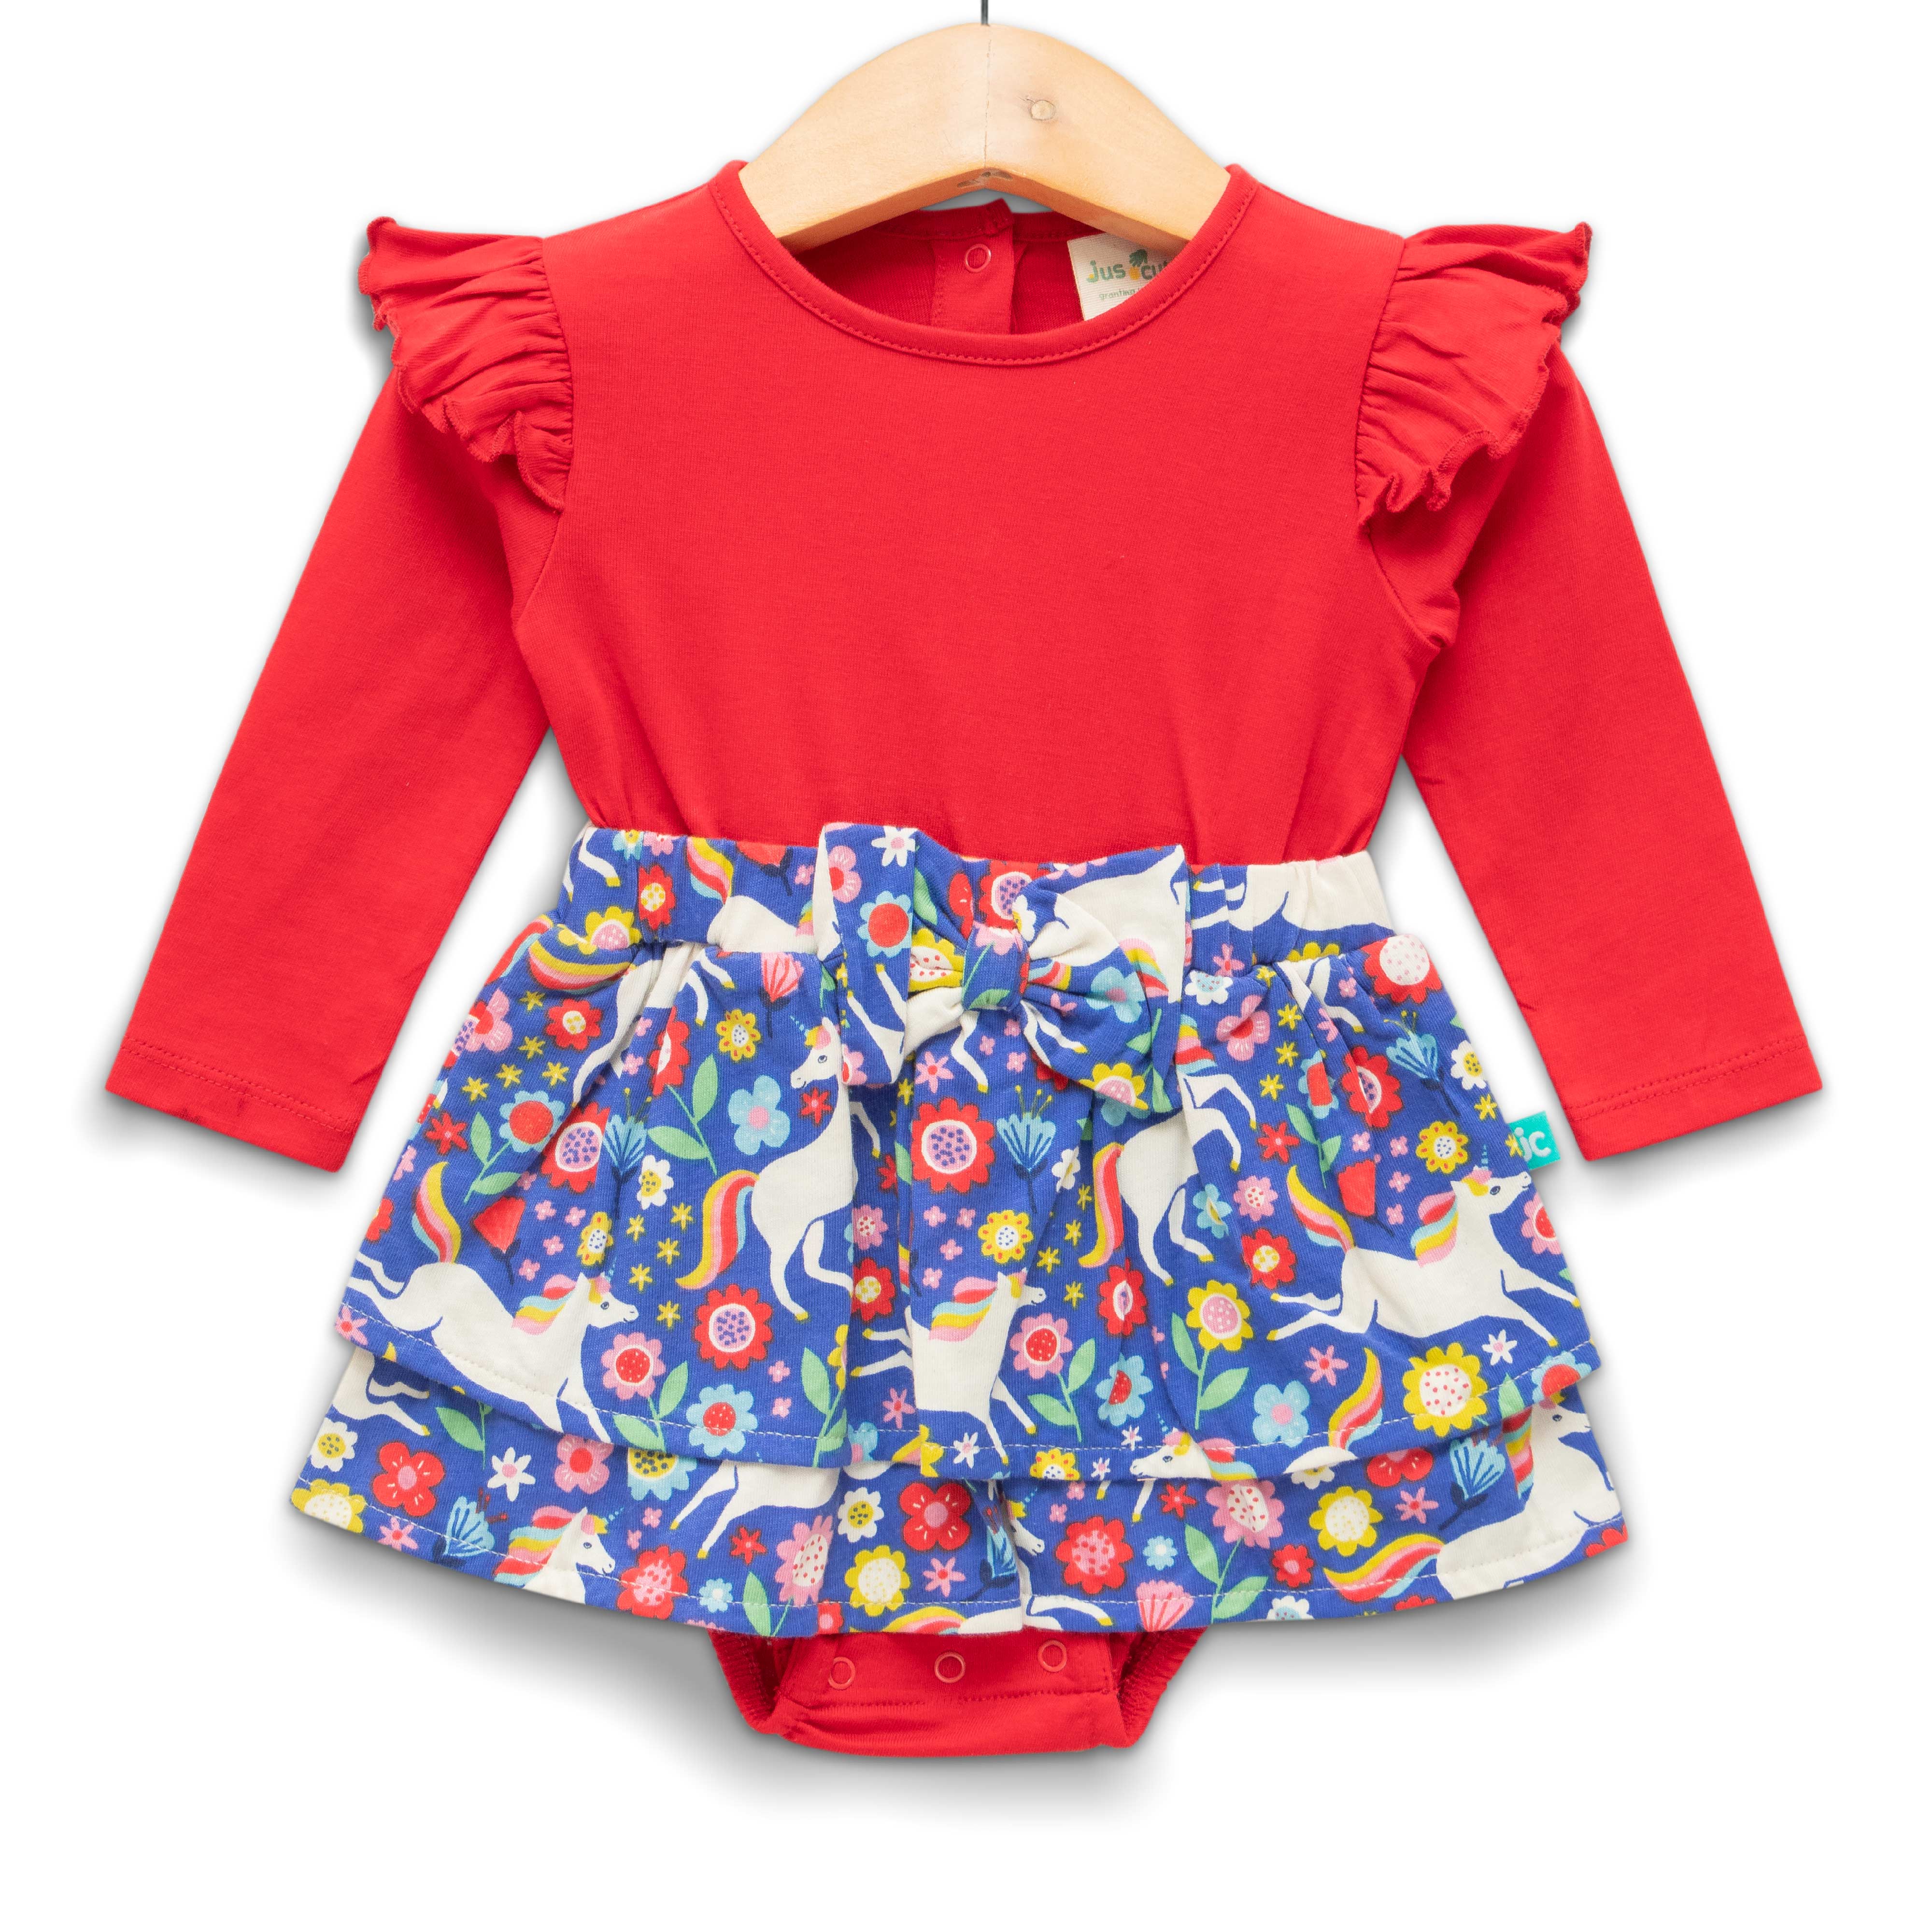 Baby Girls Solid & Printed Body Suit